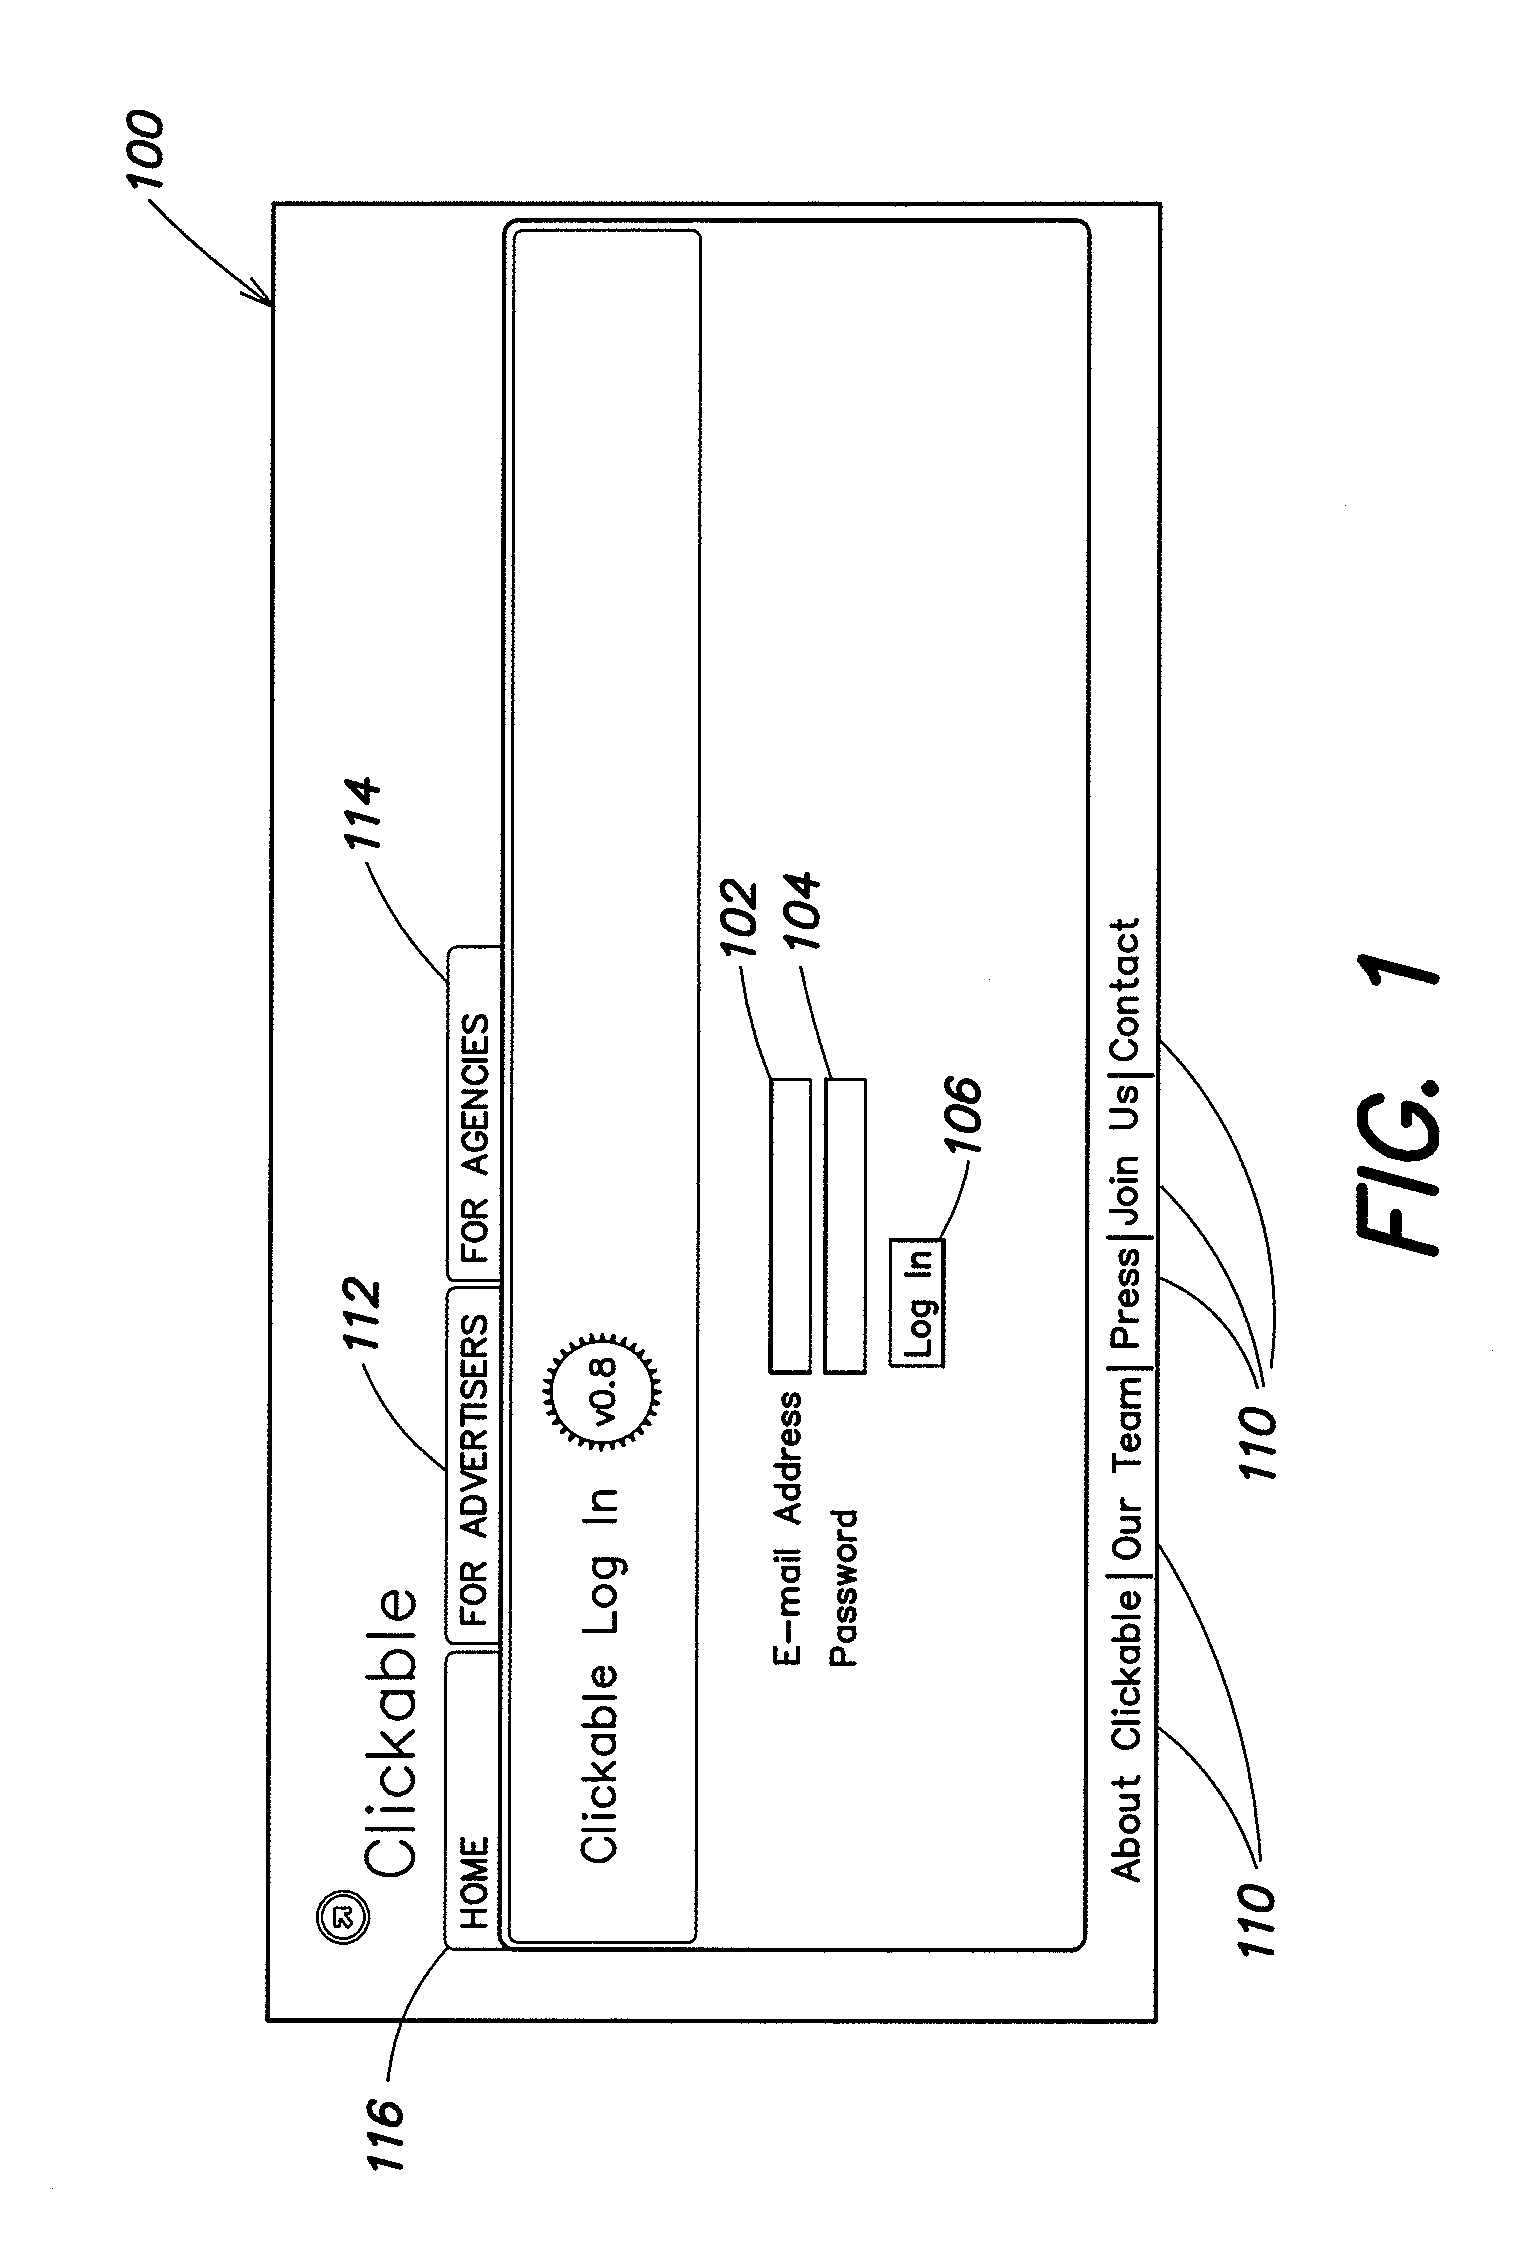 System and method for managing a plurality of advertising networks